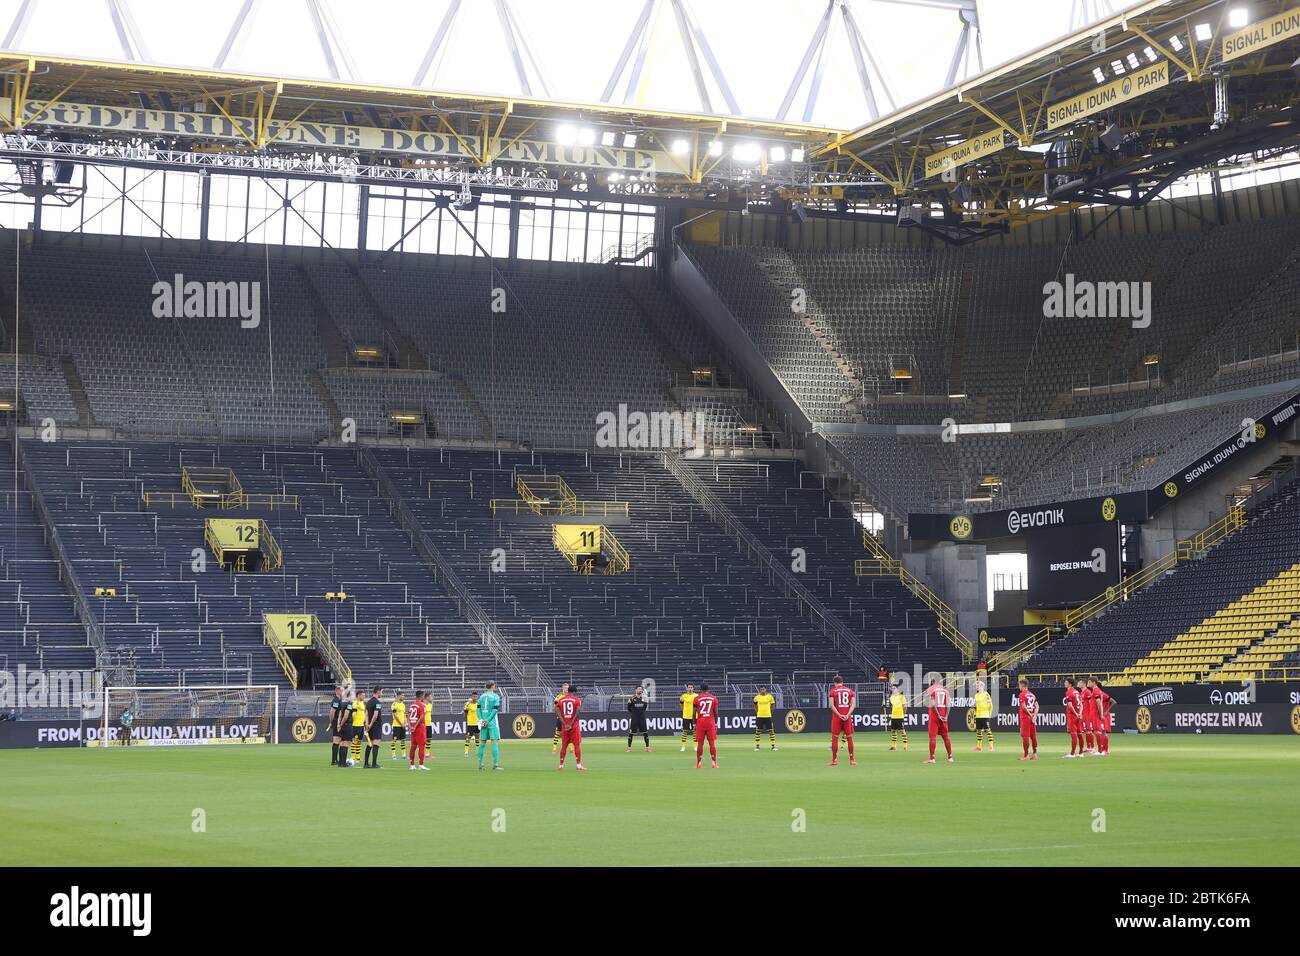 Dortmund, Germany, 26th May 2020  Minute to commemorate the victims of the corona pandemic in the football match  BORUSSIA DORTMUND - FC BAYERN MUENCHEN in 1. Bundesliga 2019/2020, matchday 28.  © Peter Schatz / Alamy Live News / Pool via Jürgen Fromme / firosportfoto   - DFL REGULATIONS PROHIBIT ANY USE OF PHOTOGRAPHS as IMAGE SEQUENCES and/or QUASI-VIDEO -   National and international News-Agencies OUT  Editorial Use ONLY Stock Photo